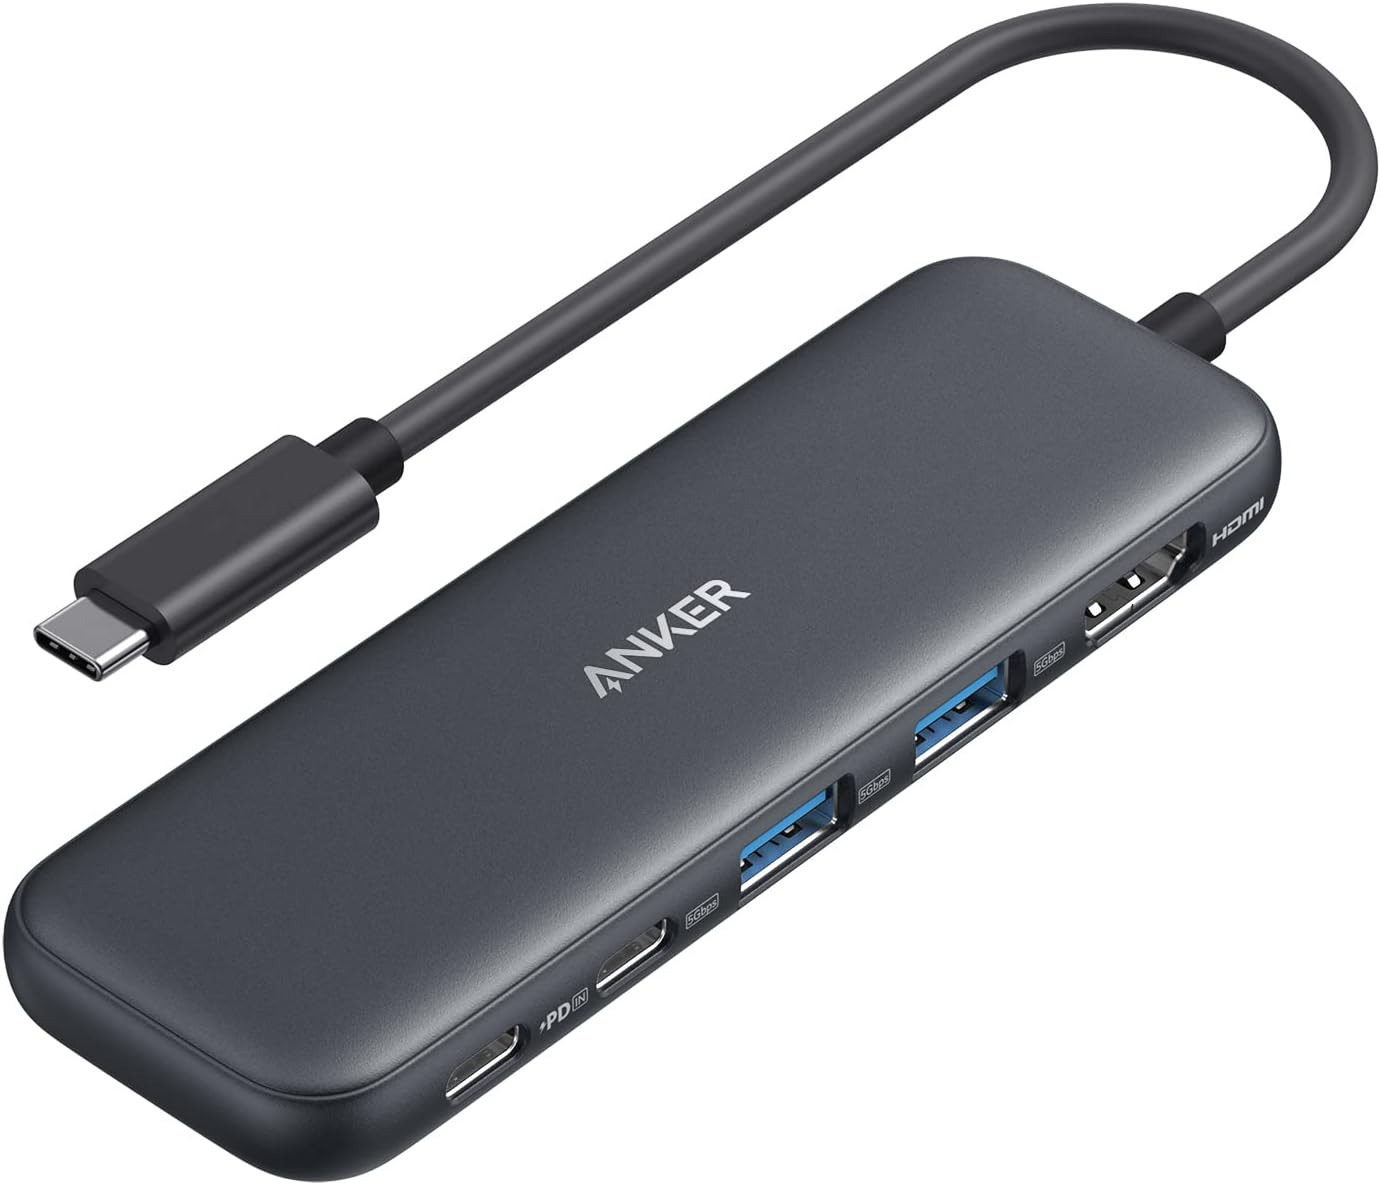 332 USB-C Hub (5-in-1) with 4K HDMI Display, 5Gbps - and 2 5Gbps USB-A Data Port